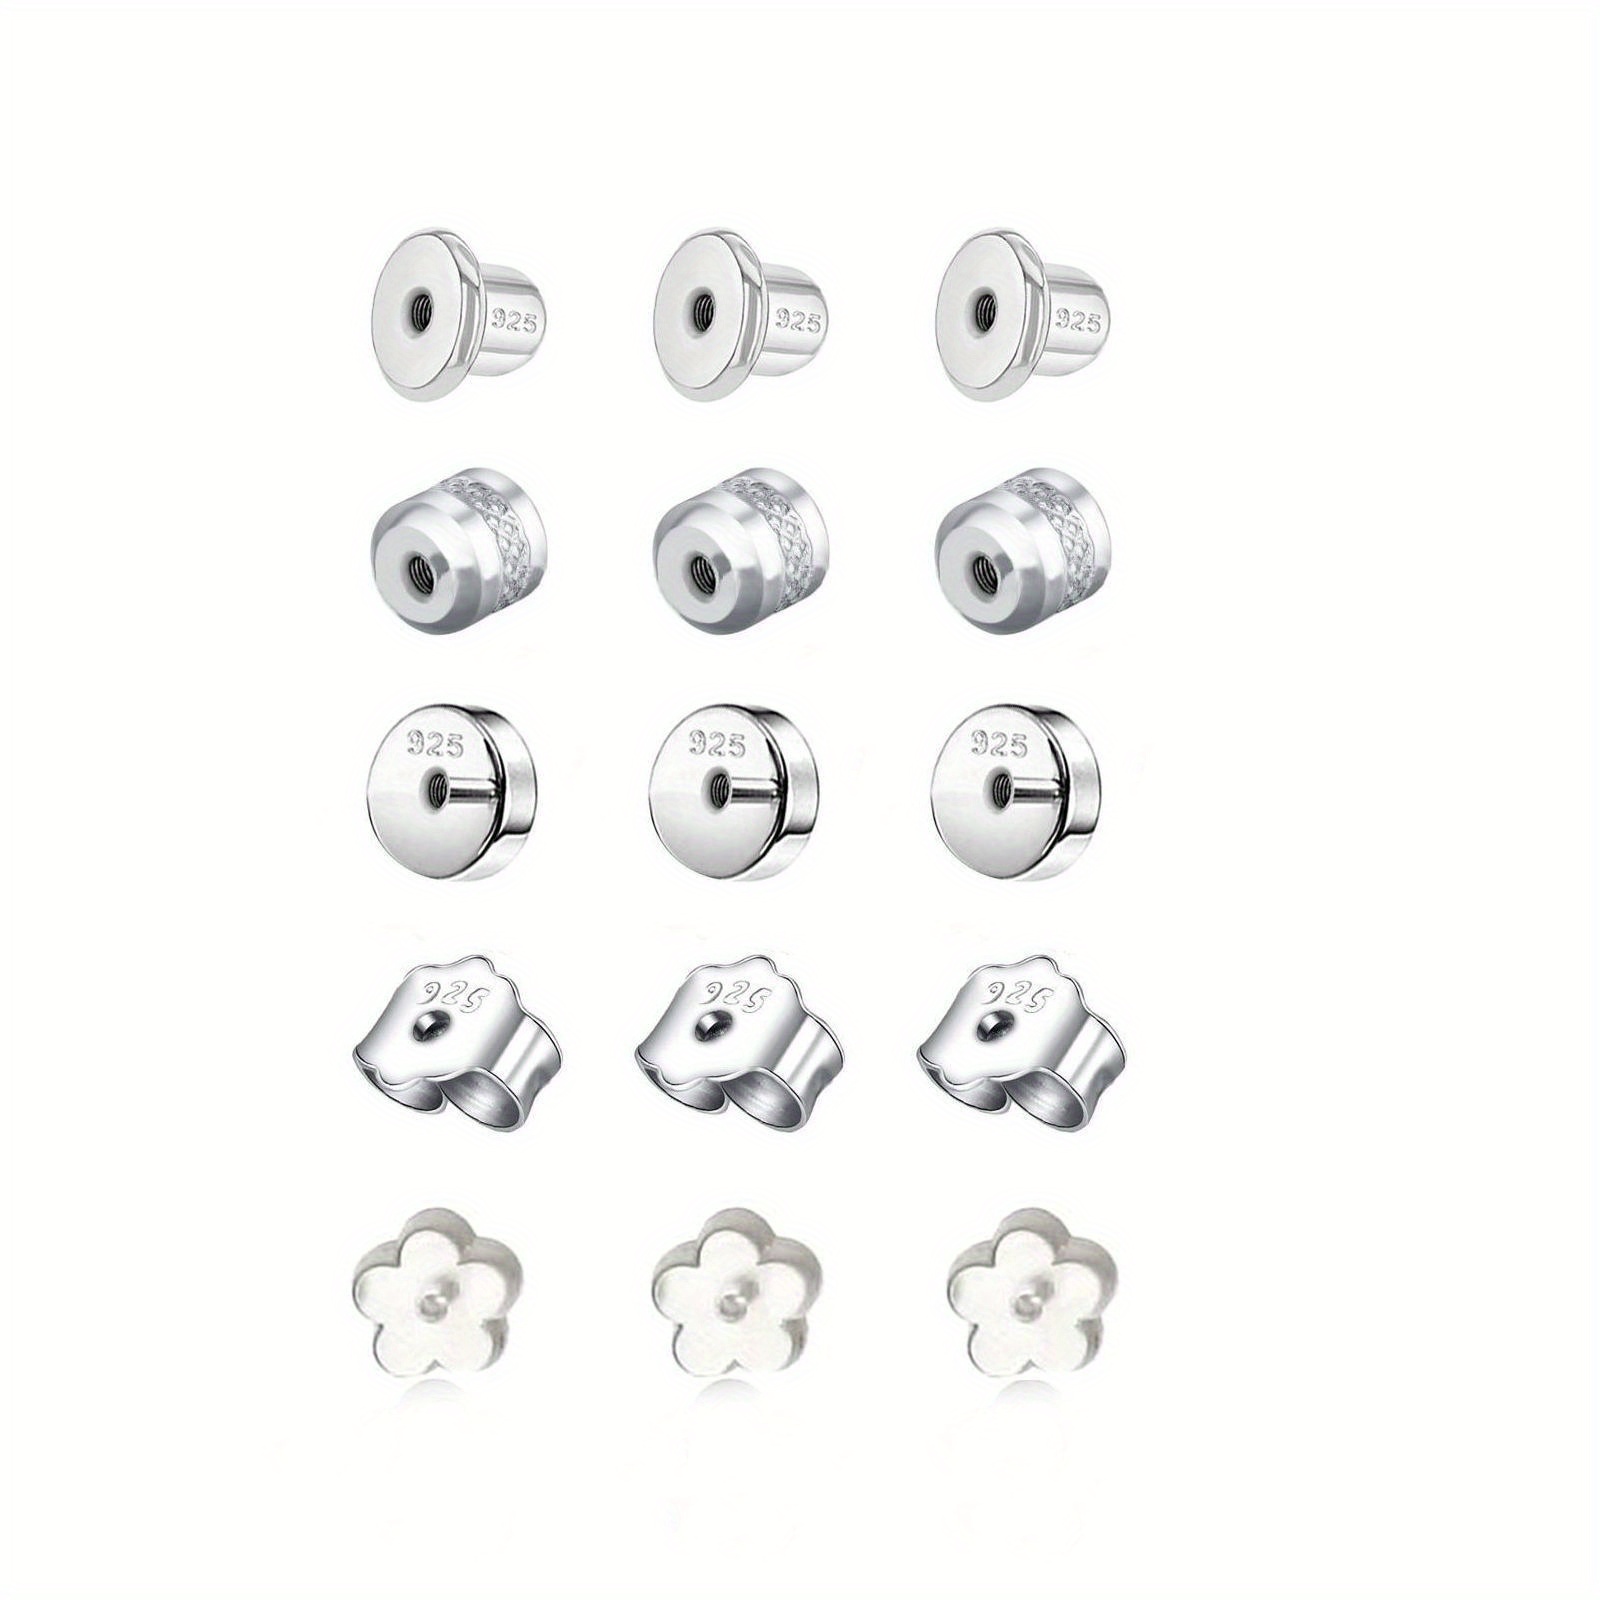 5 Pair Replacement Rubber Earring Backs